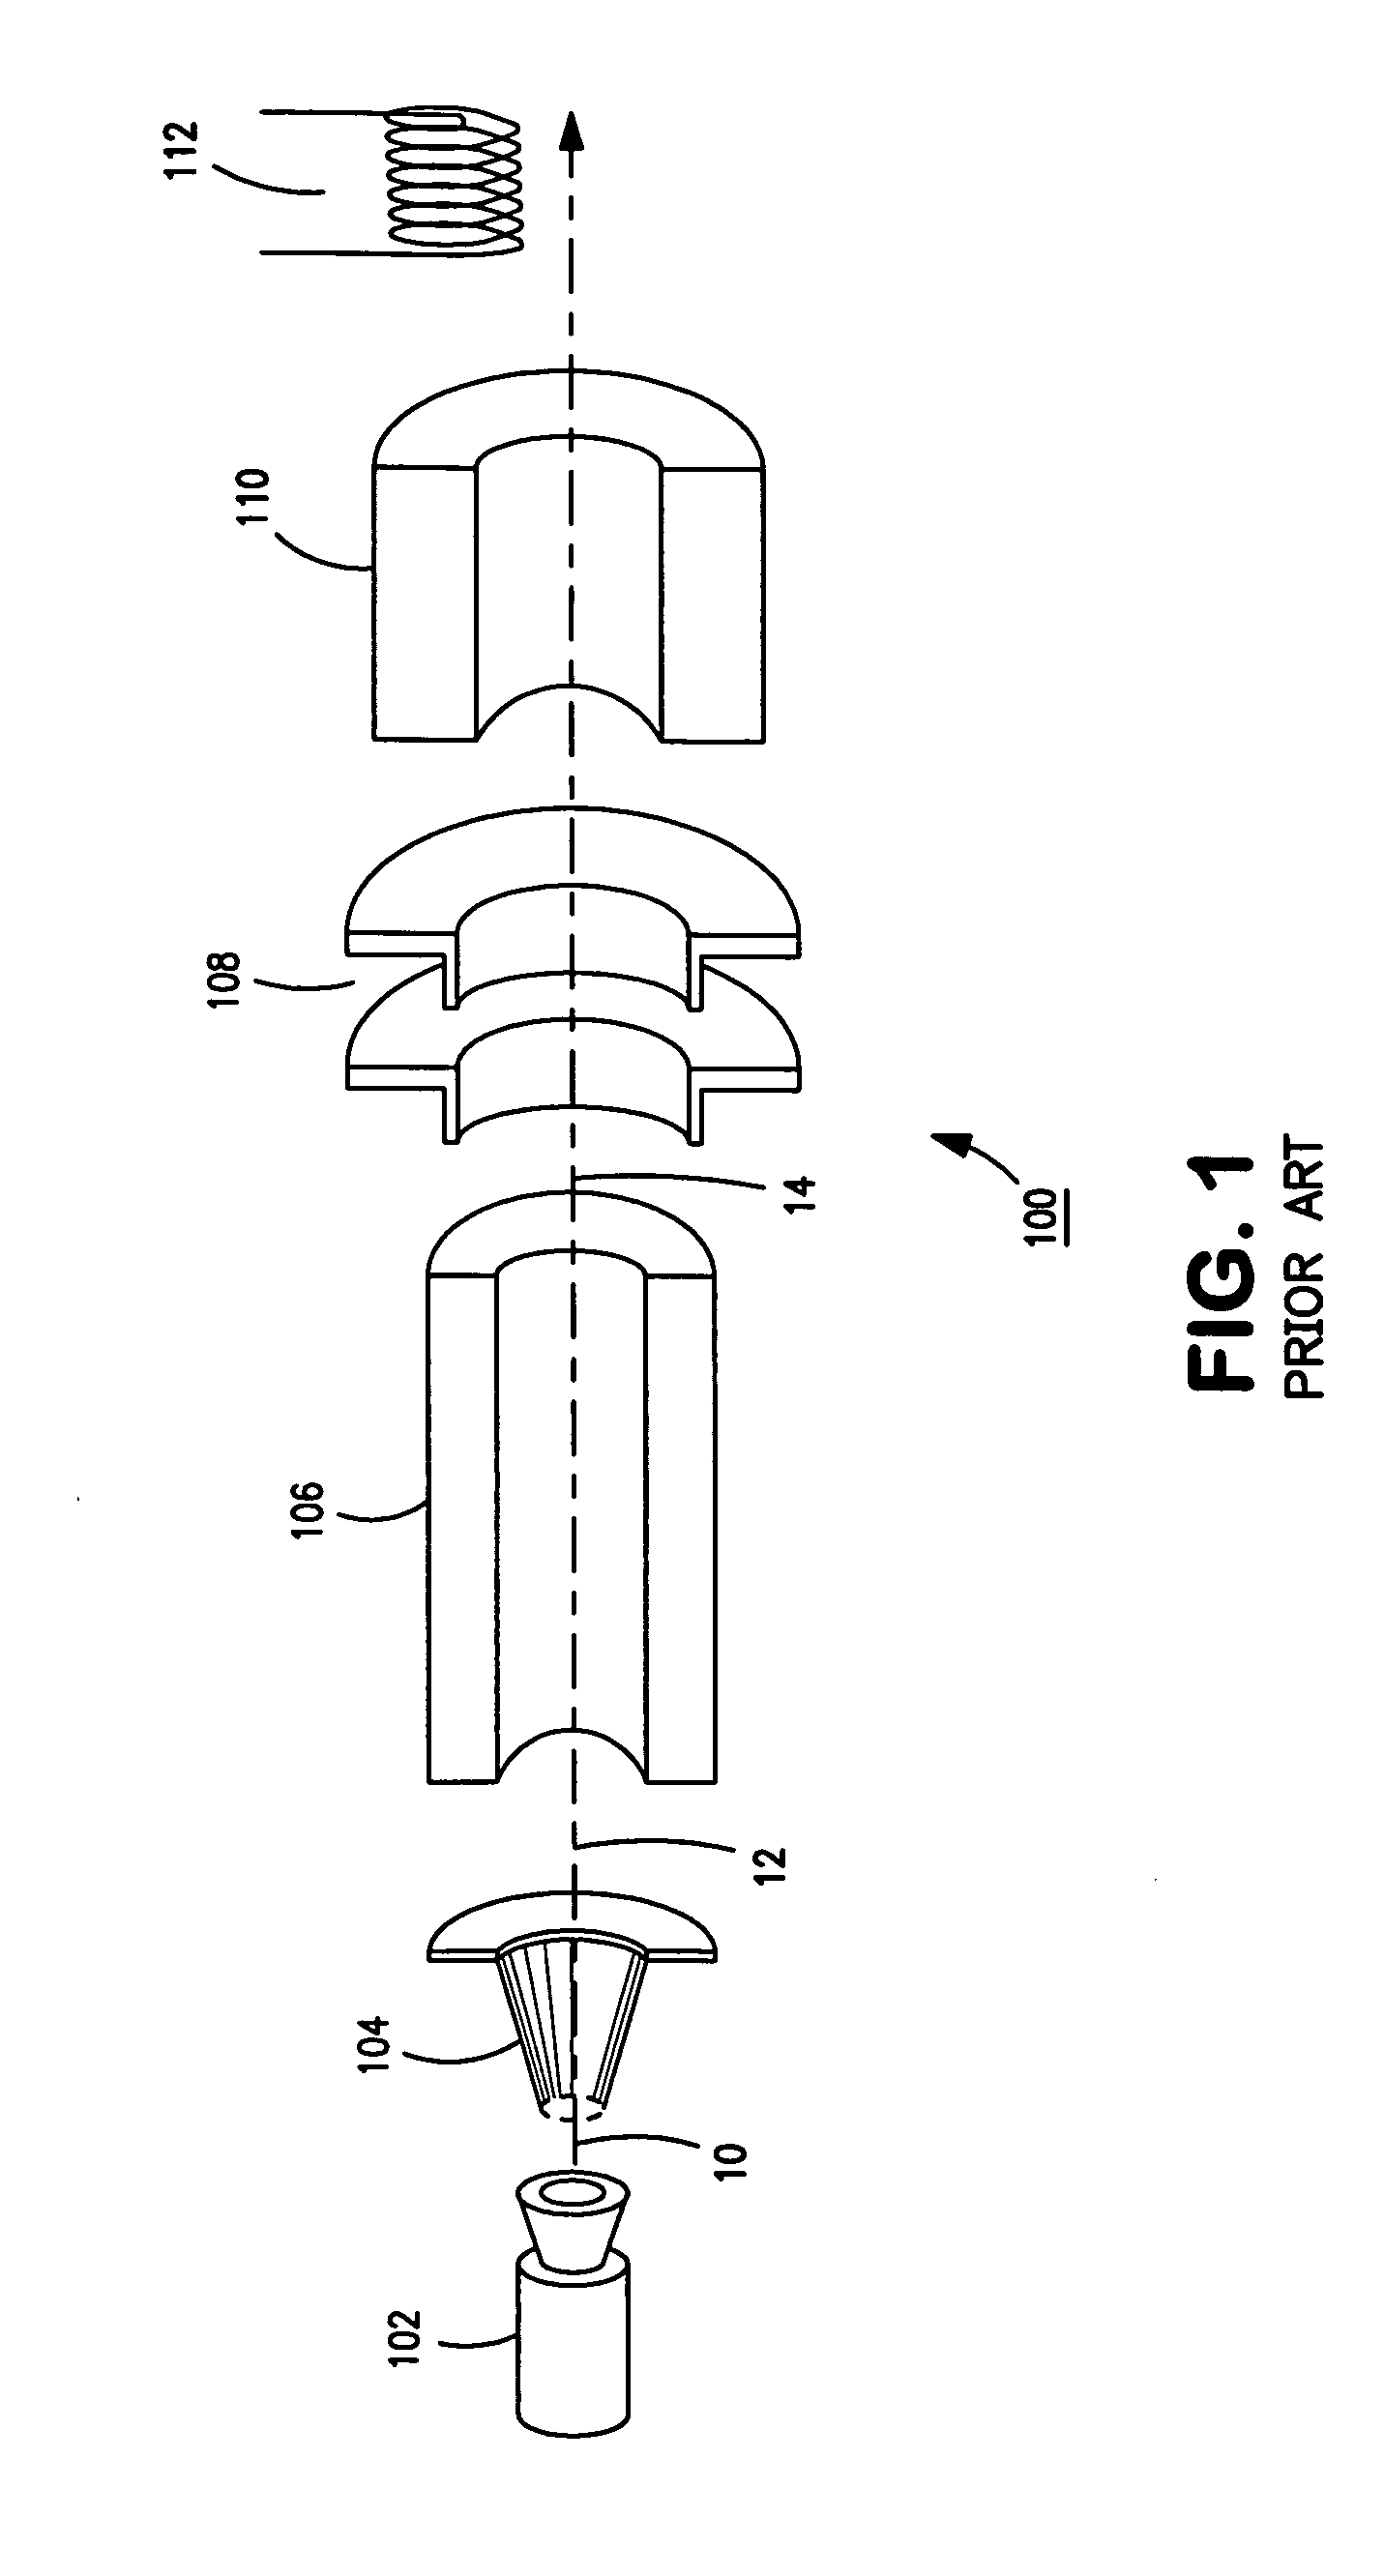 RF electron source for ionizing gas clusters